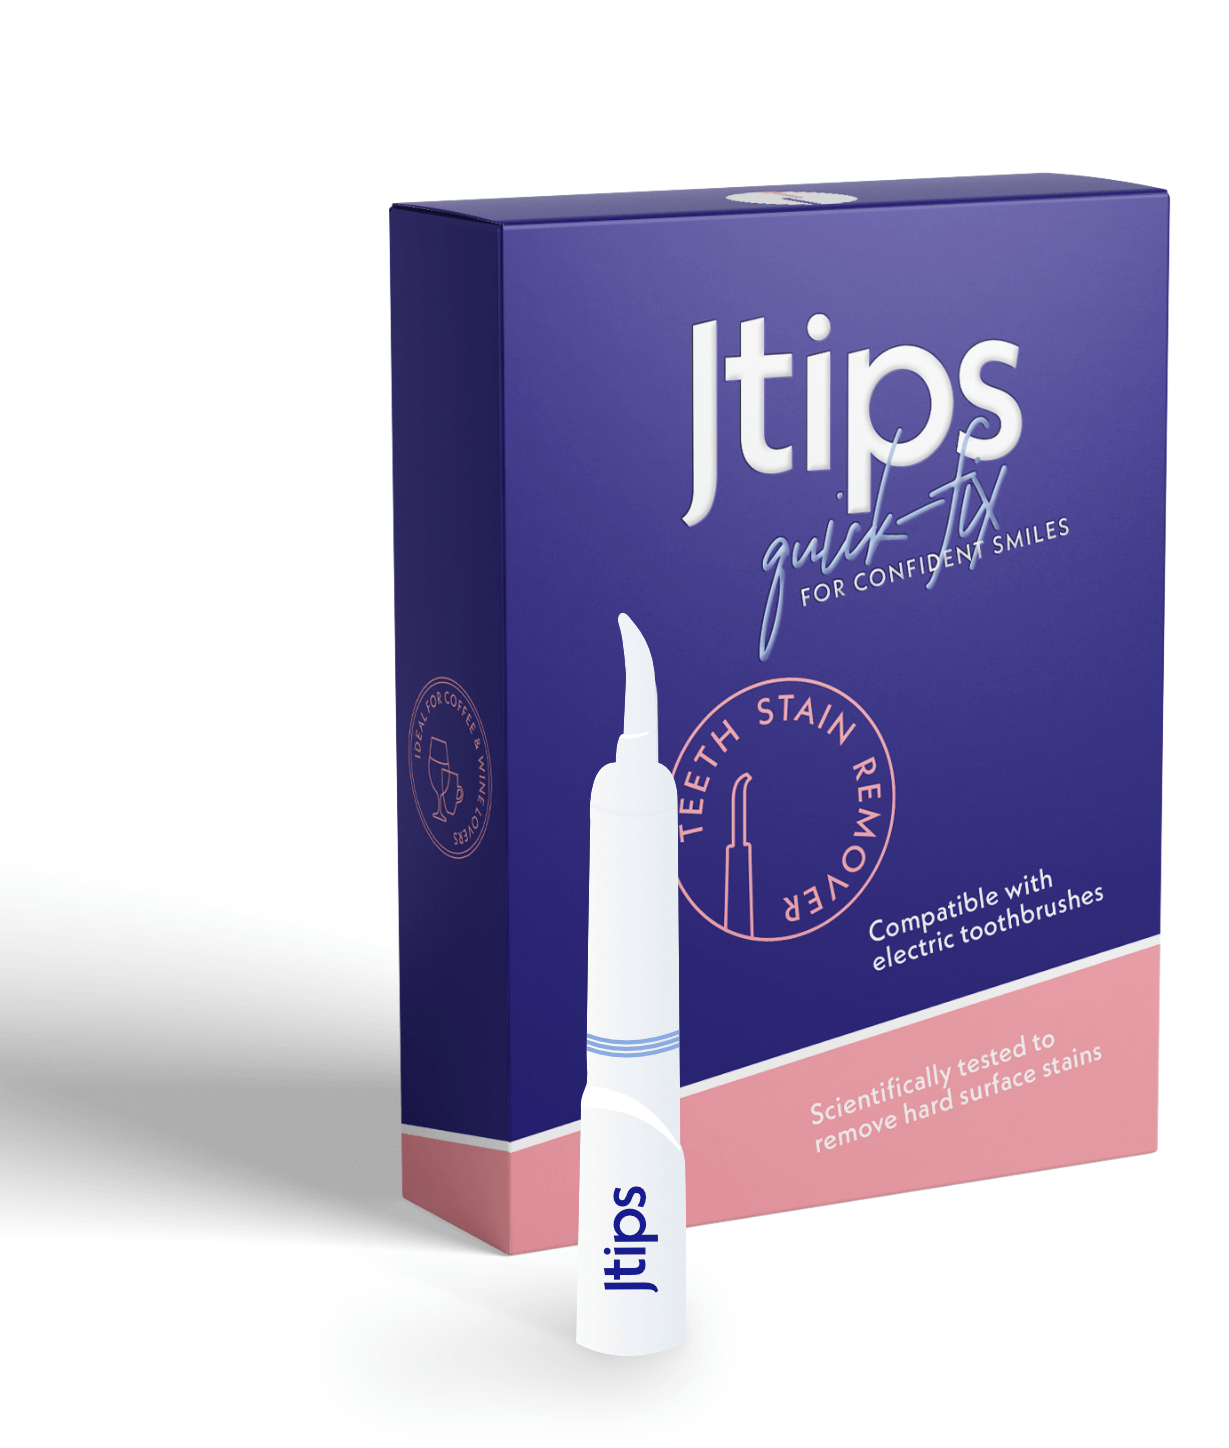 An image displaying the new and improved Jtips Electric Toothbrush Attachment.